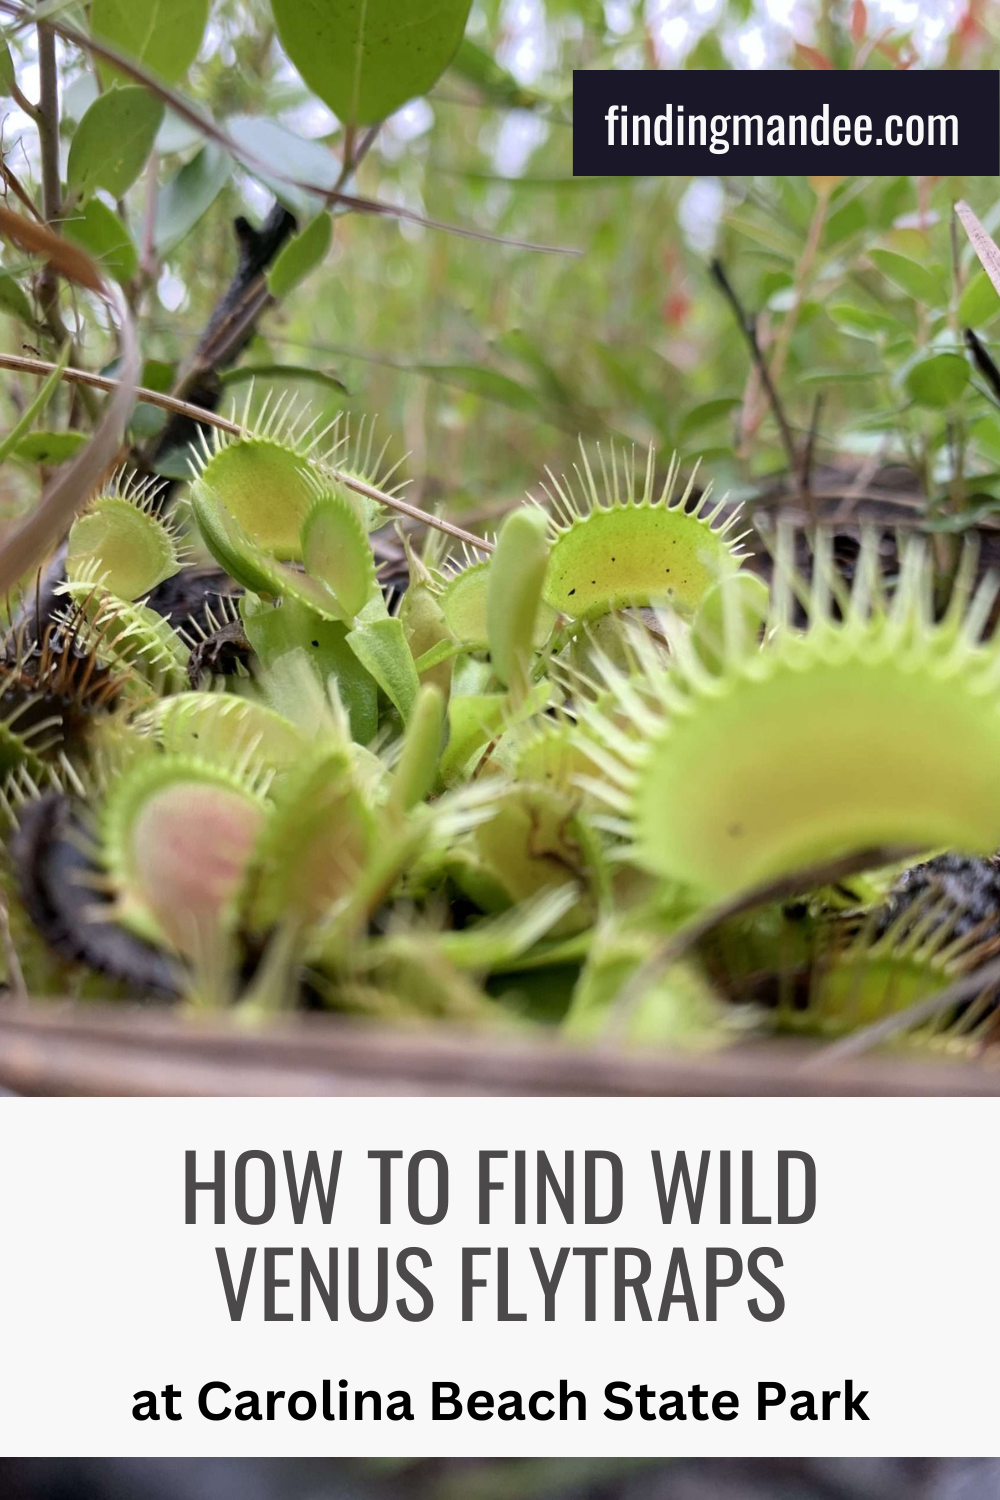 How to Find Wild Venus Flytraps at Carolina Beach State Park | Finding Mandee